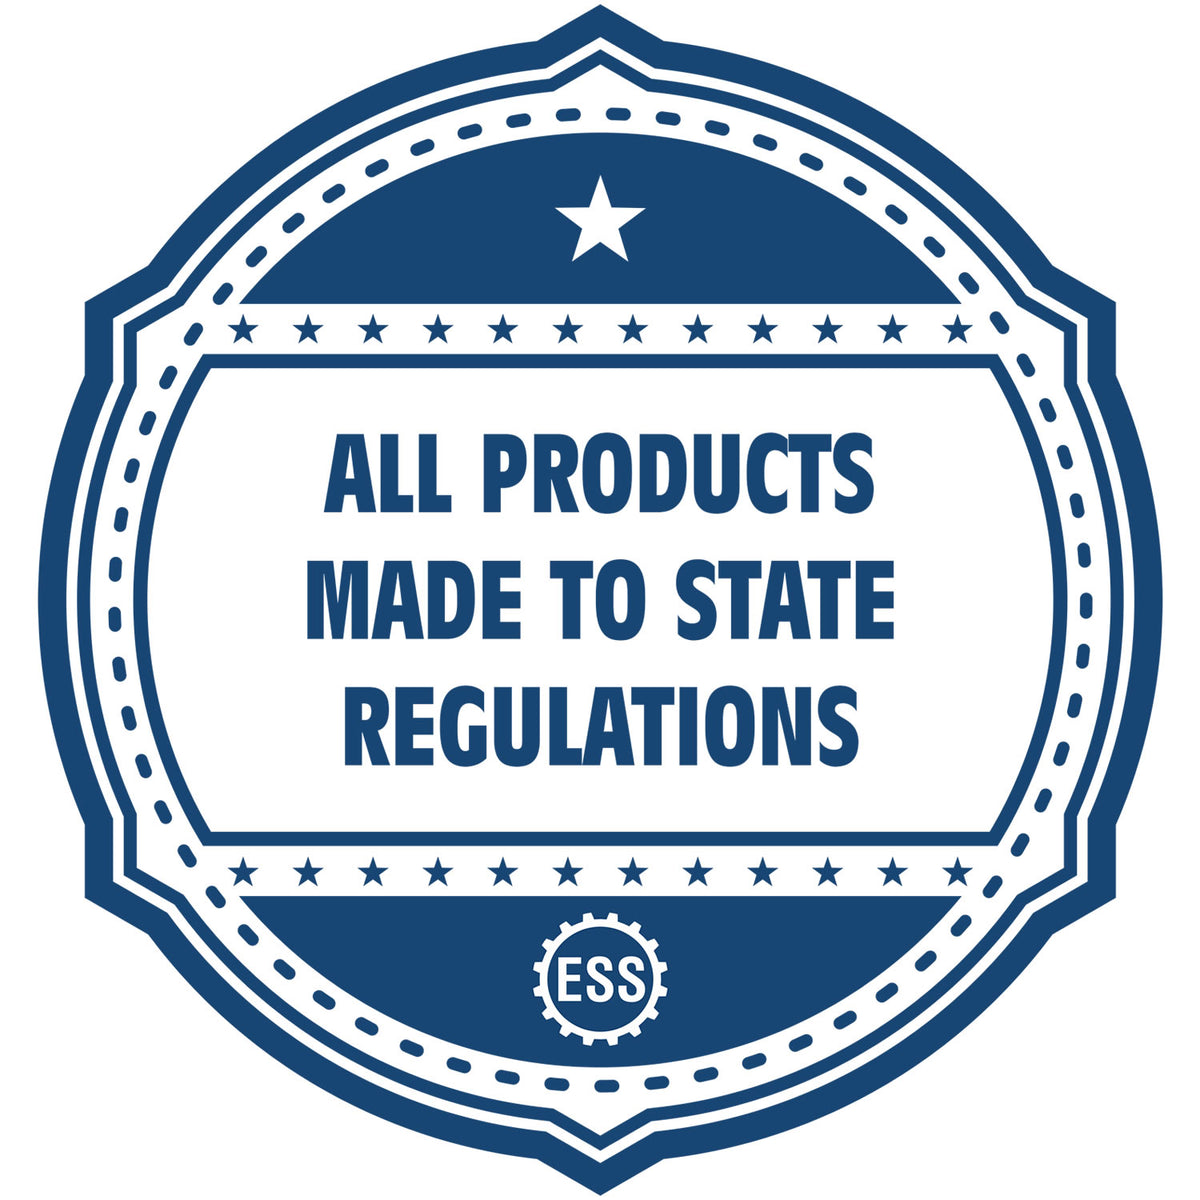 An icon or badge element for the Heavy Duty Cast Iron Idaho Land Surveyor Seal Embosser showing that this product is made in compliance with state regulations.